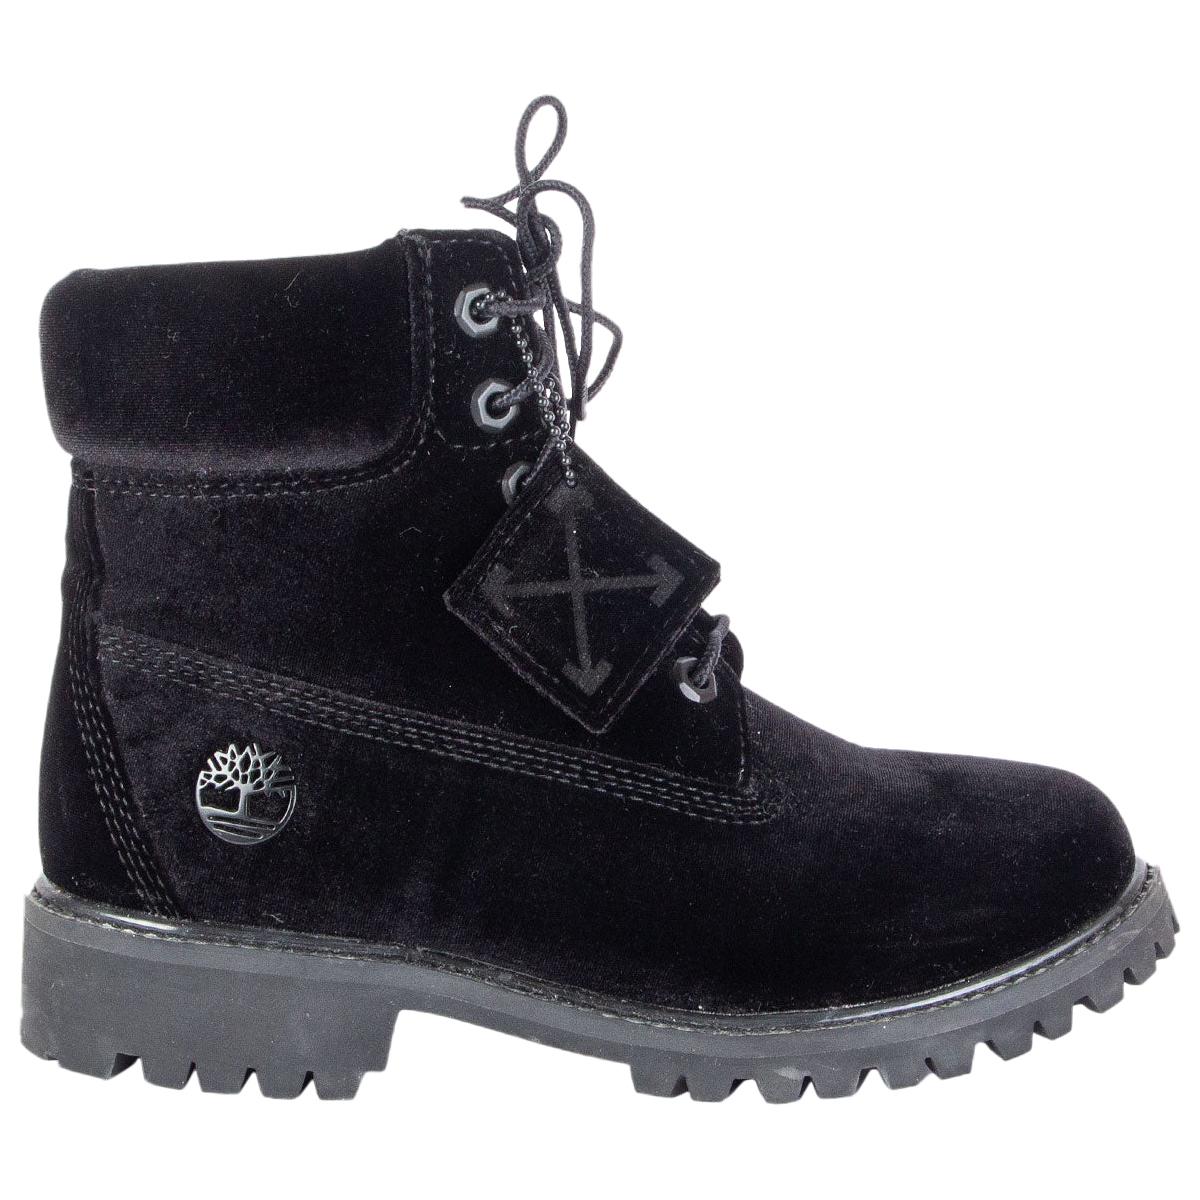 OFF-WHITE X TIMBERLAND black velvet Ankle Boots Shoes 37